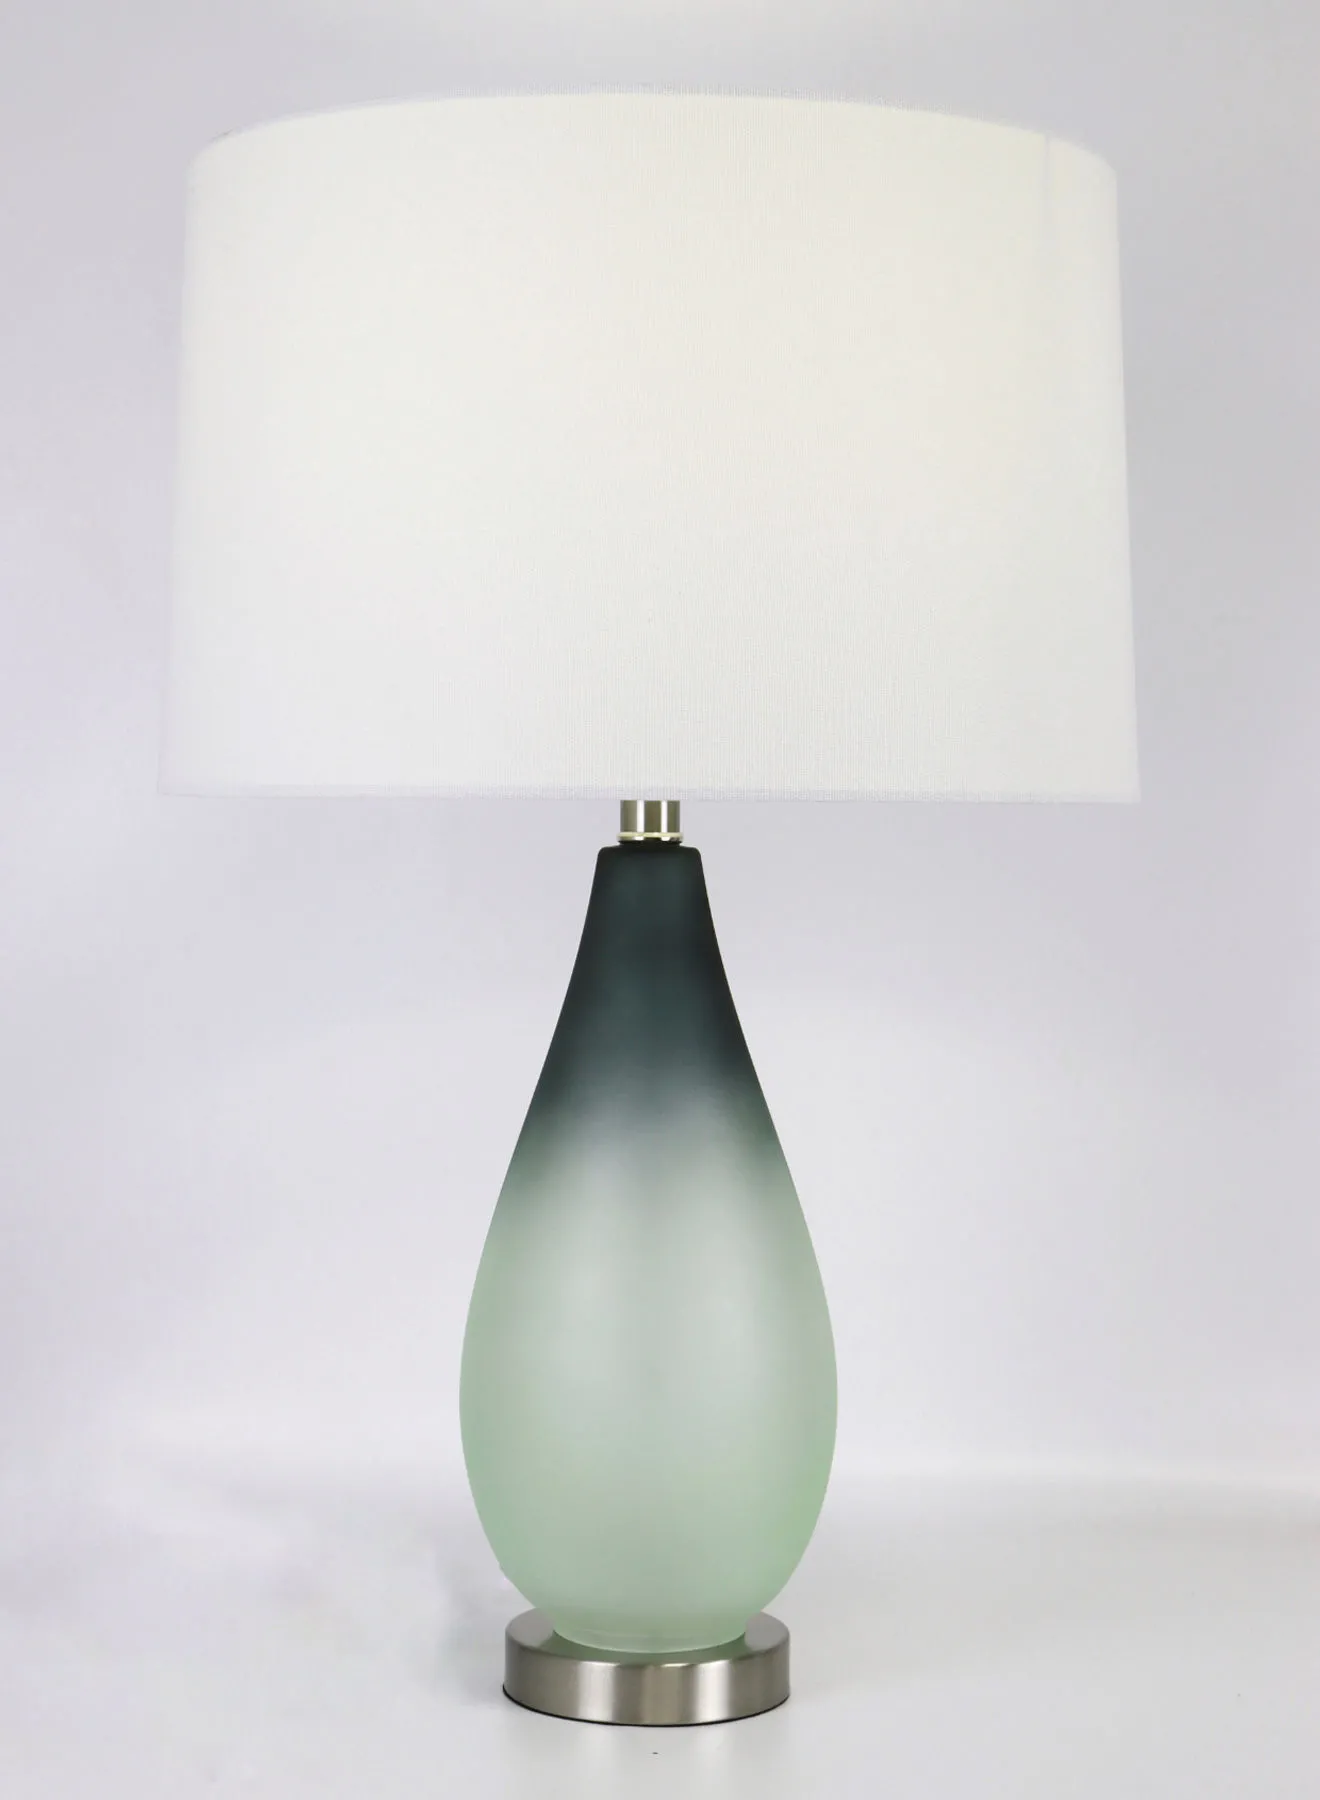 ebb & flow Modern Design Glass Table Lamp Unique Luxury Quality Material for the Perfect Stylish Home RSN71044 Deep Grey 16 x 25